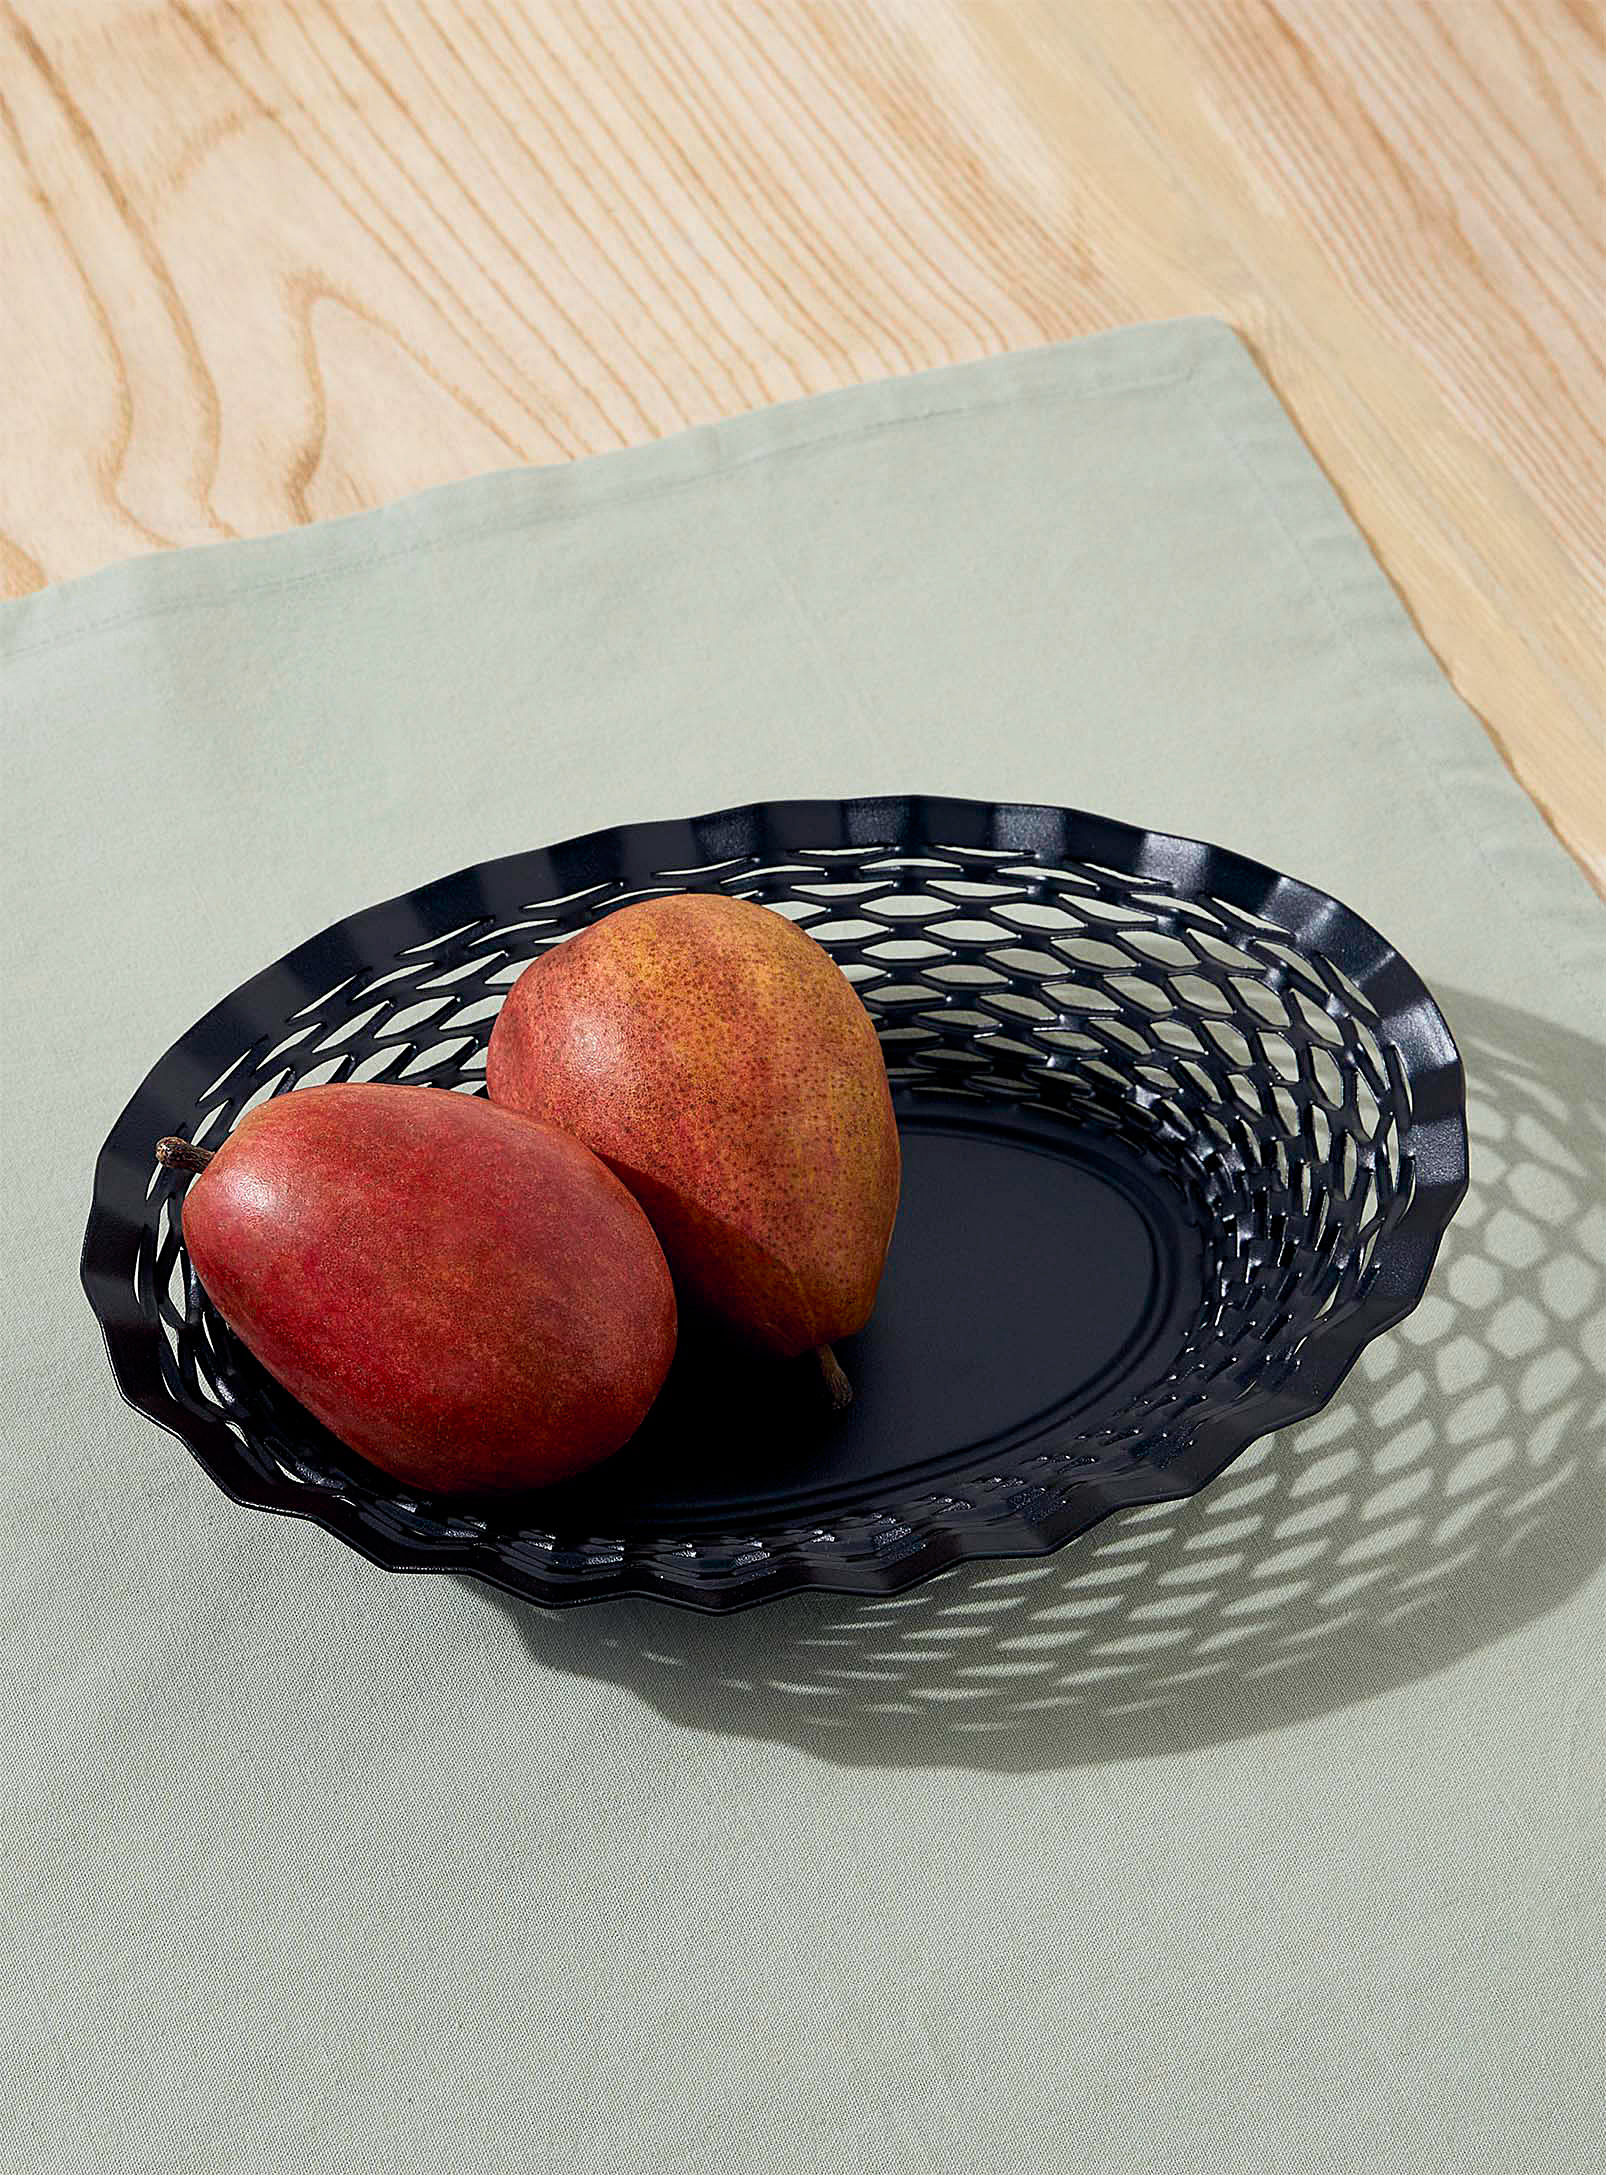 Simons Maison Small Oval Bread Basket In Black